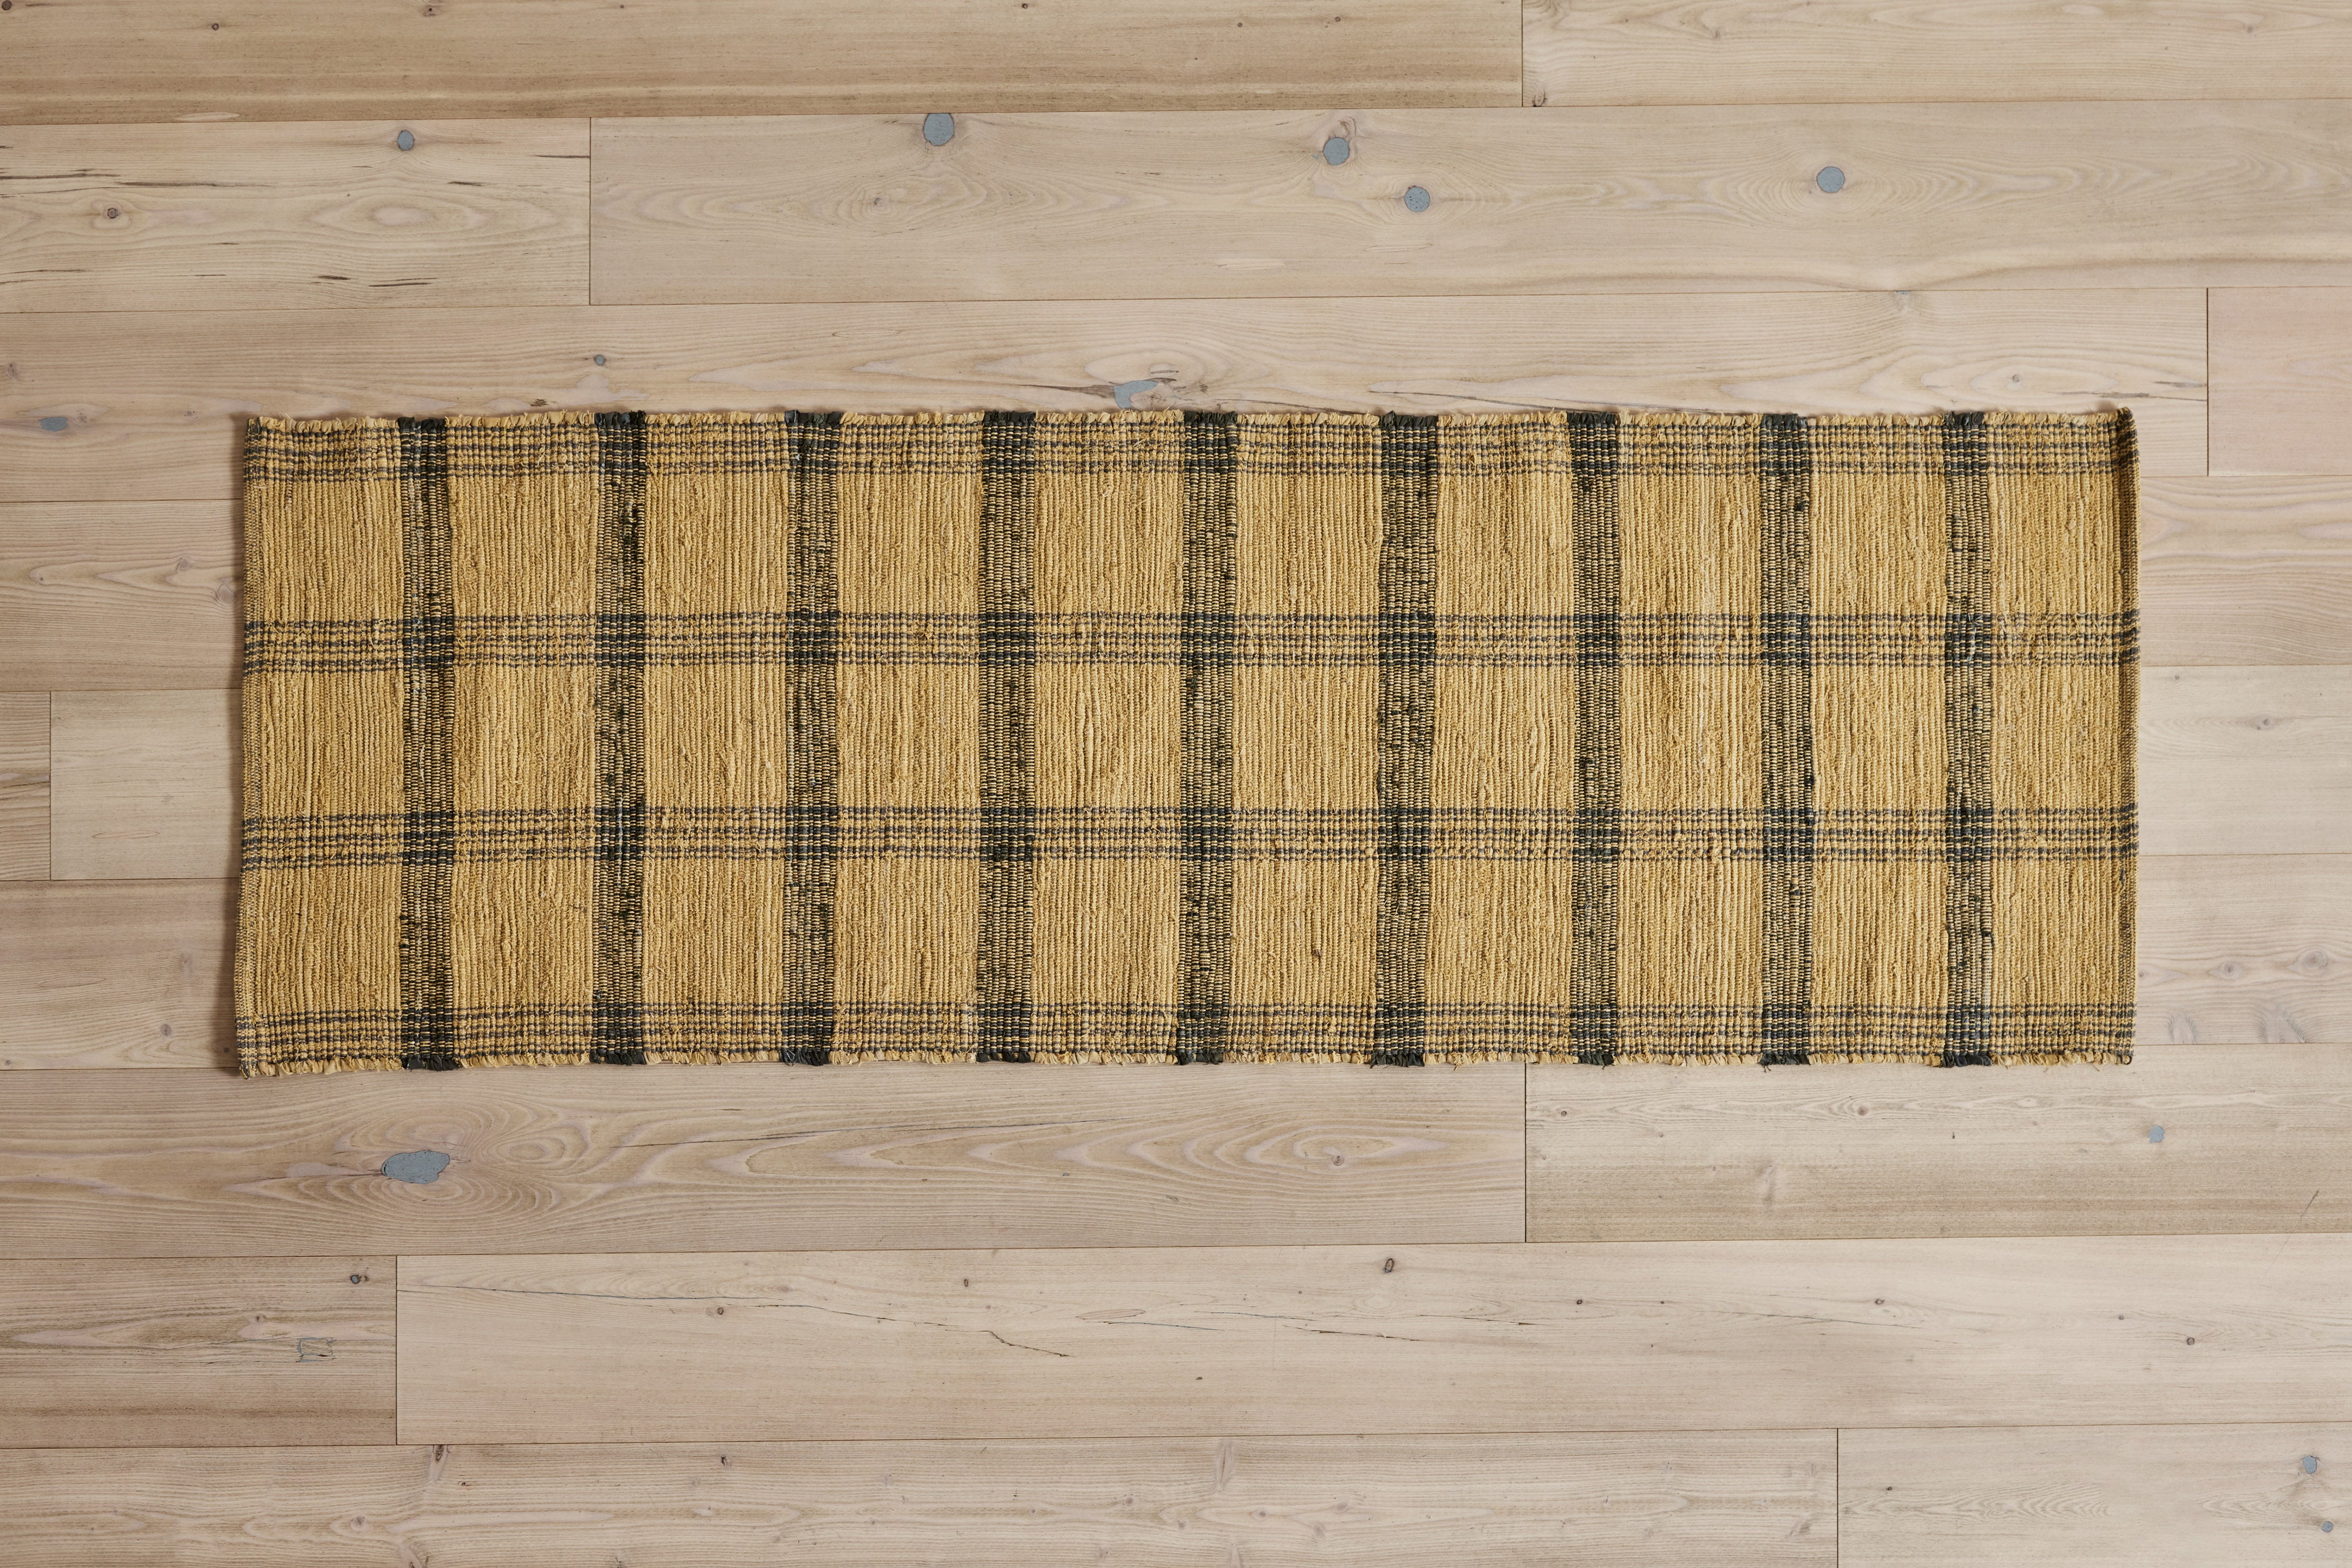 Nickey Kehoe, Plaid Rug in Wheat 2 x 6' - In Stock